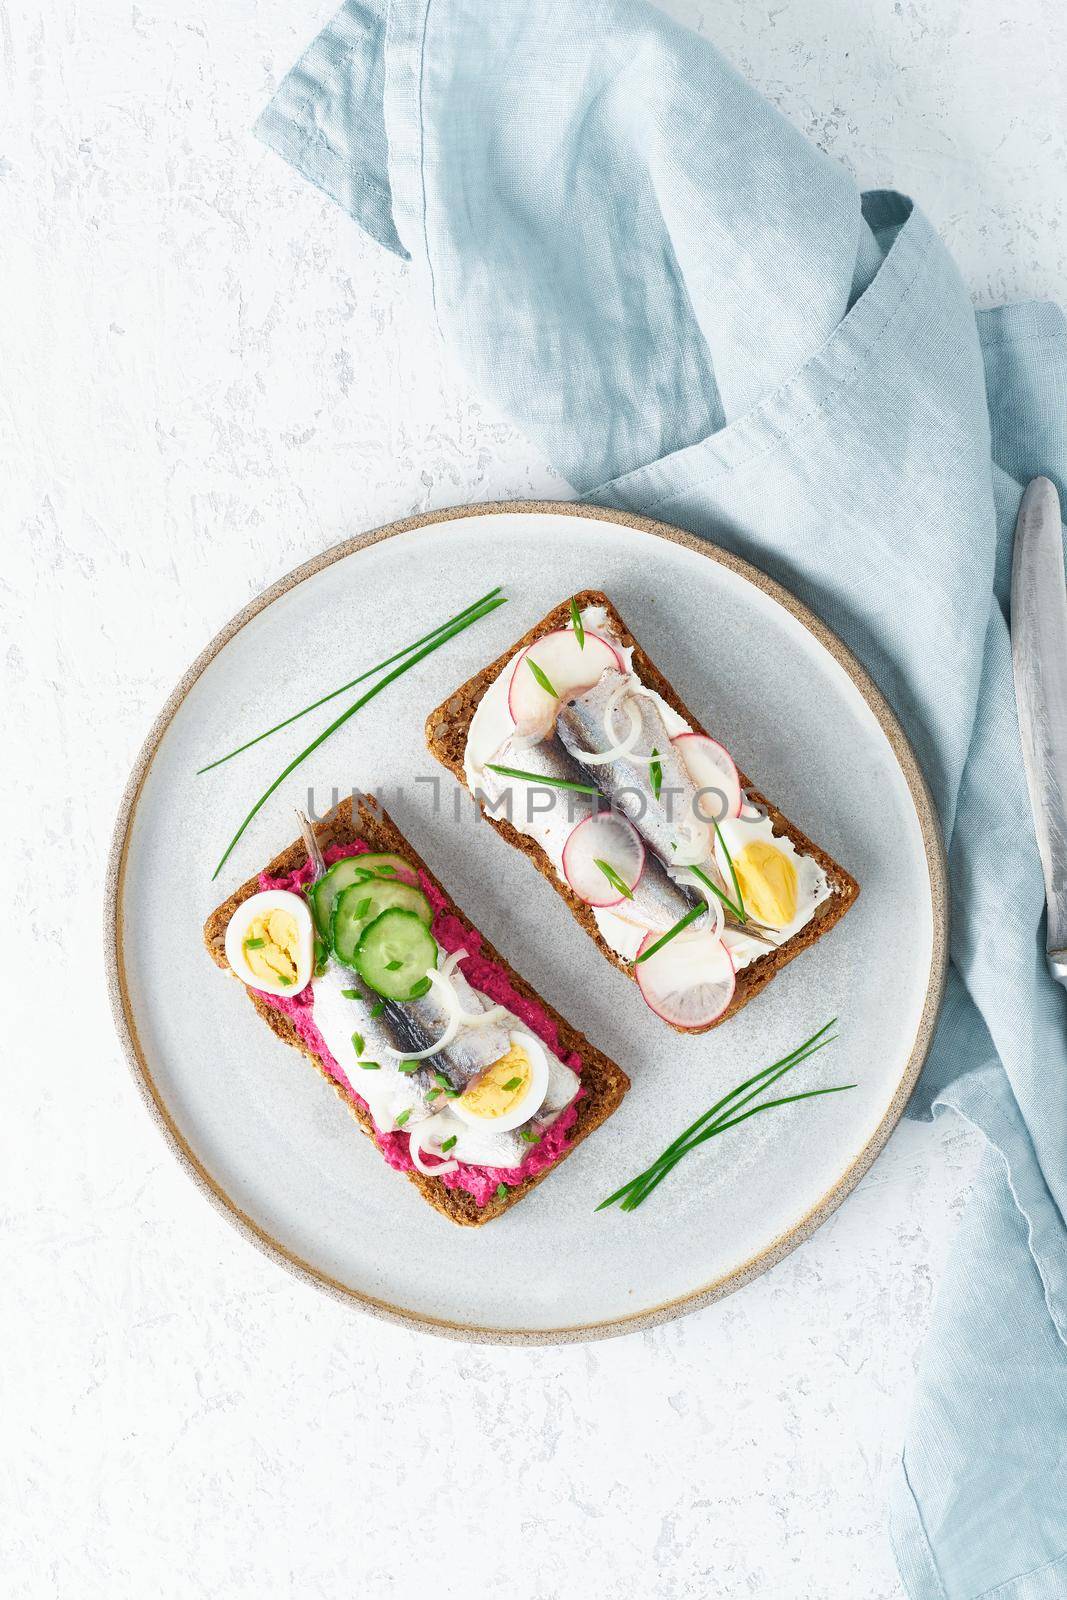 Savory smorrebrod, two traditional Danish sandwiches. Black rye bread with anchovy, beetroot, radish, eggs, cream cheese on grey plate on a white stone table, vertical